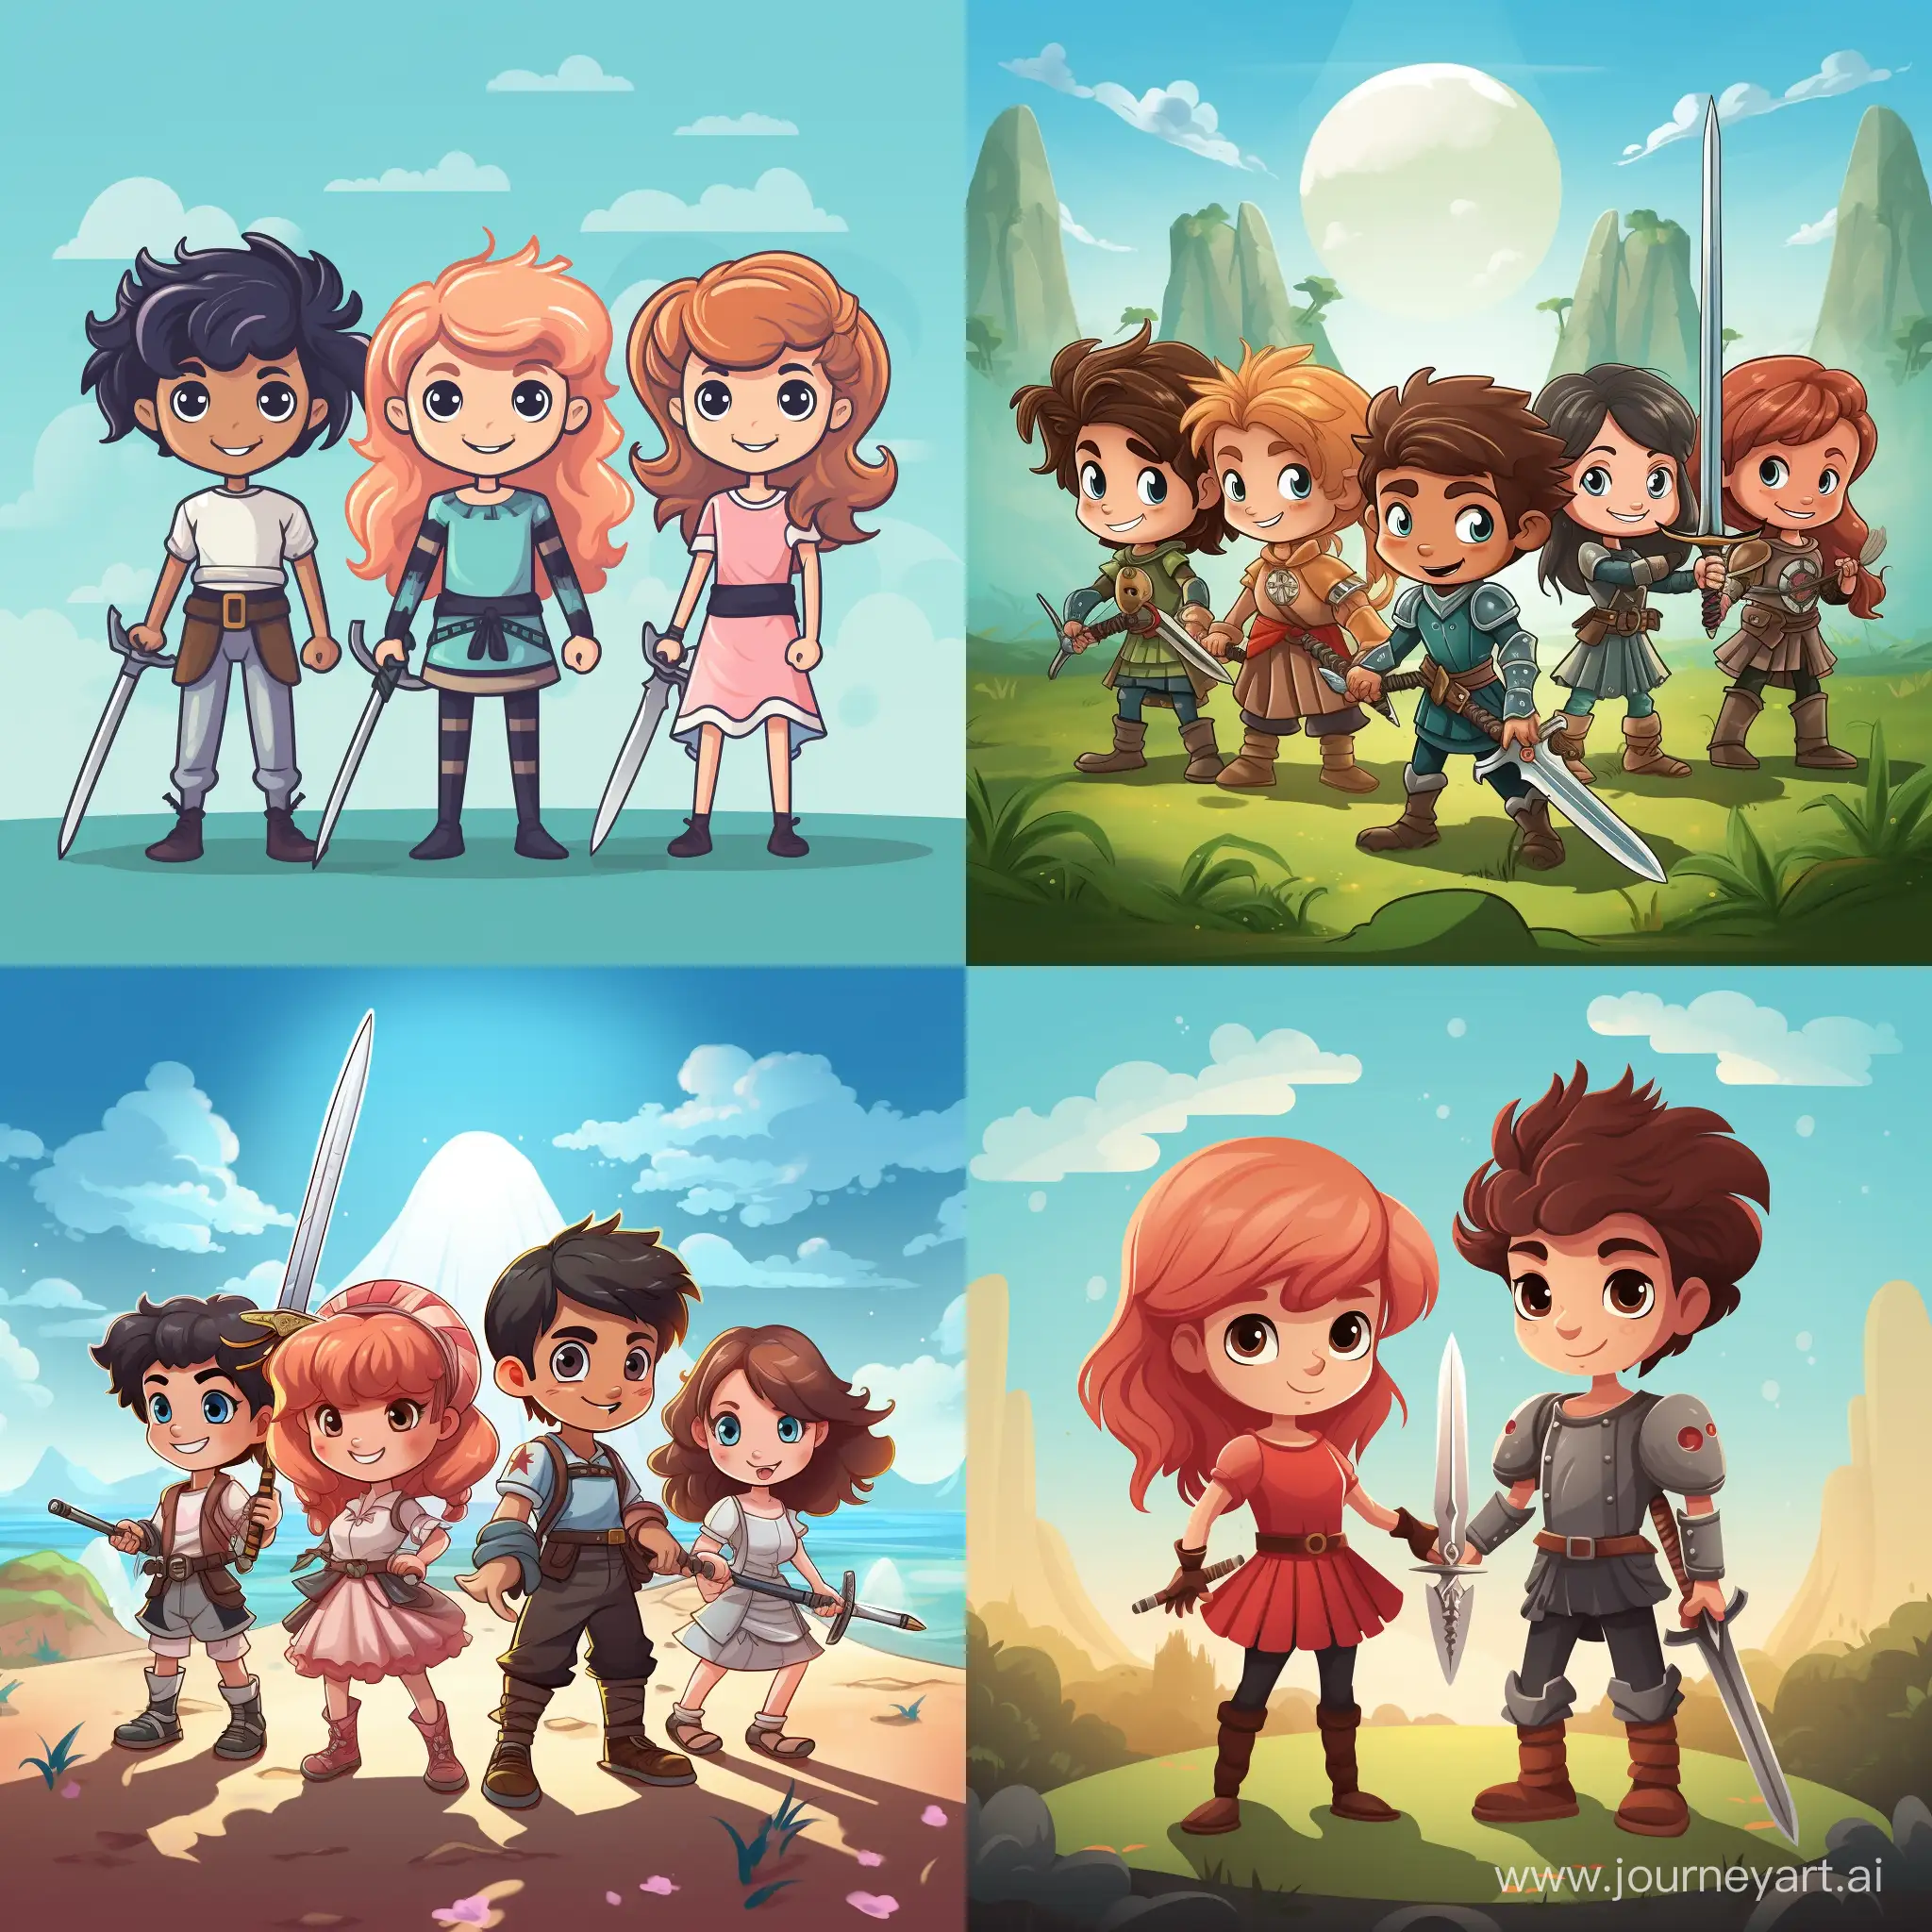 Adventurous-Boys-and-Girls-with-Swords-in-Whimsical-Cartoon-Style